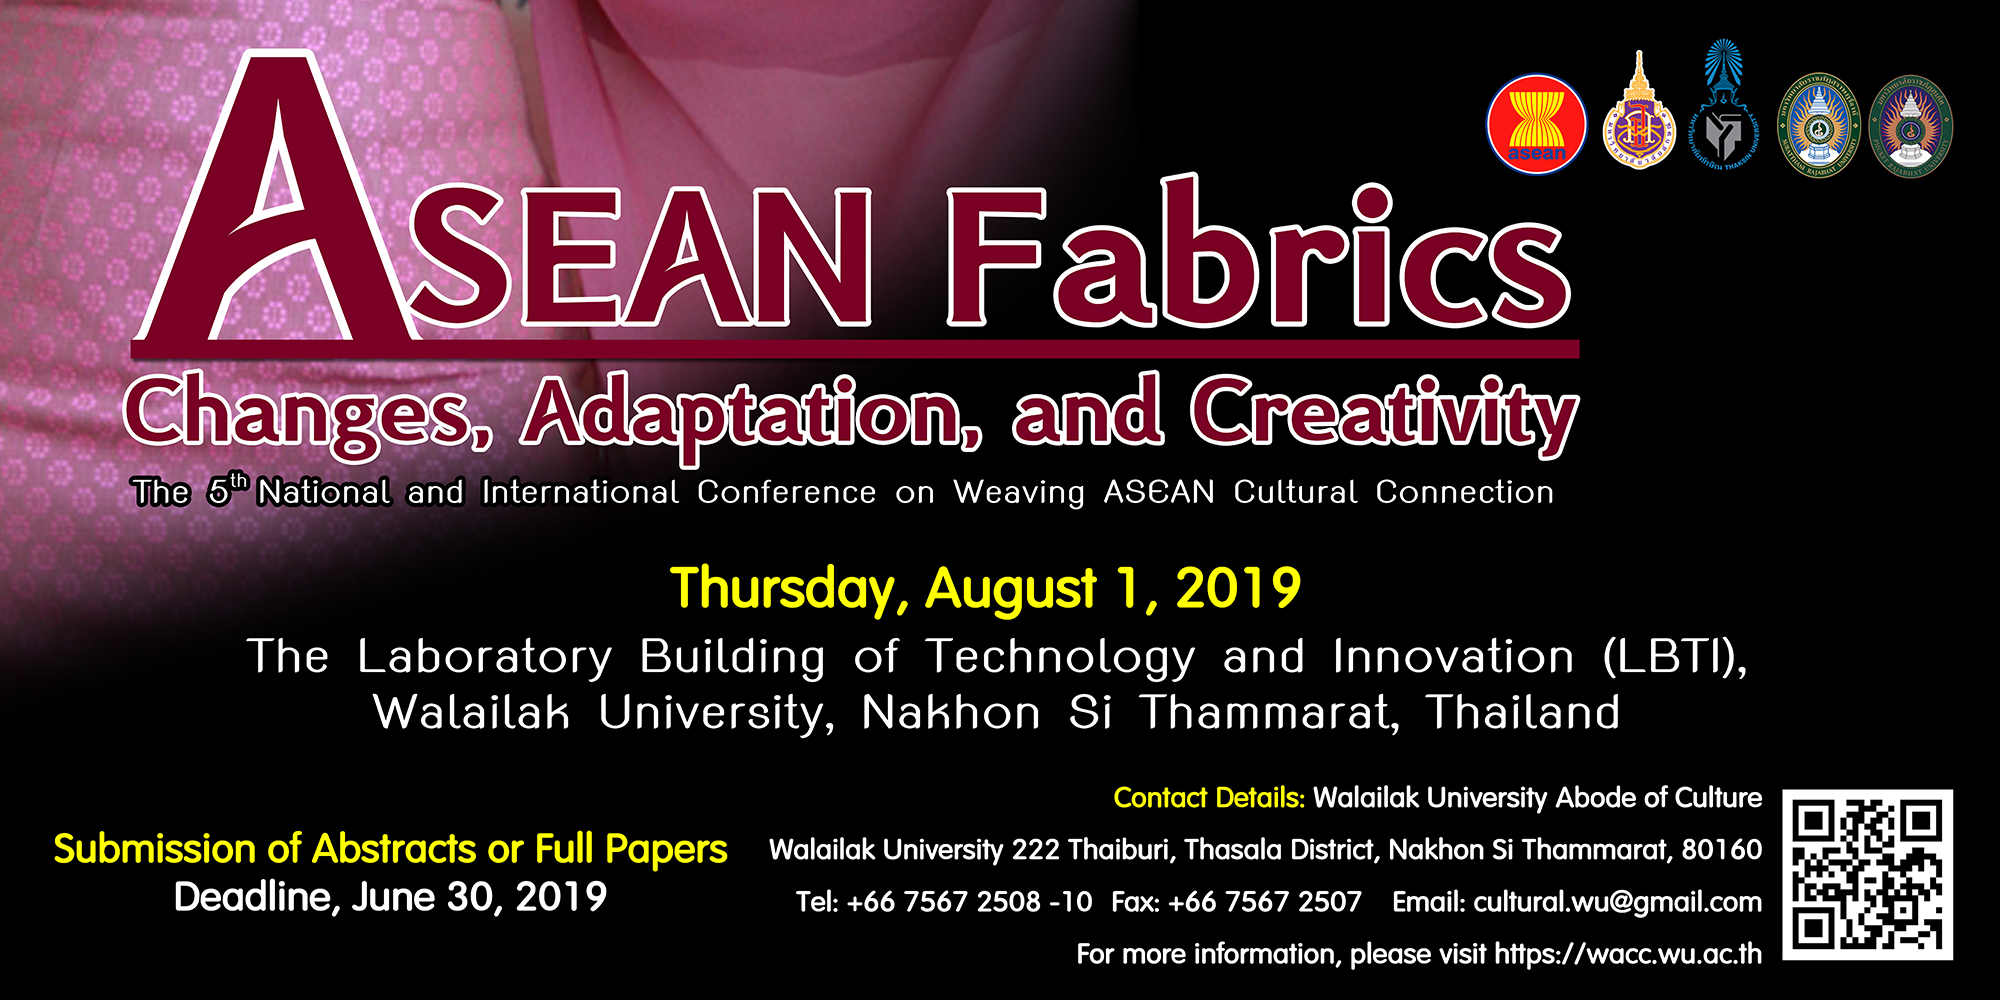 Call for paper : 5th National and International Conference on Weaving ASEAN Cultural Connection " “ASEAN Fabrics : Changes, Adaptation, and Creativity”